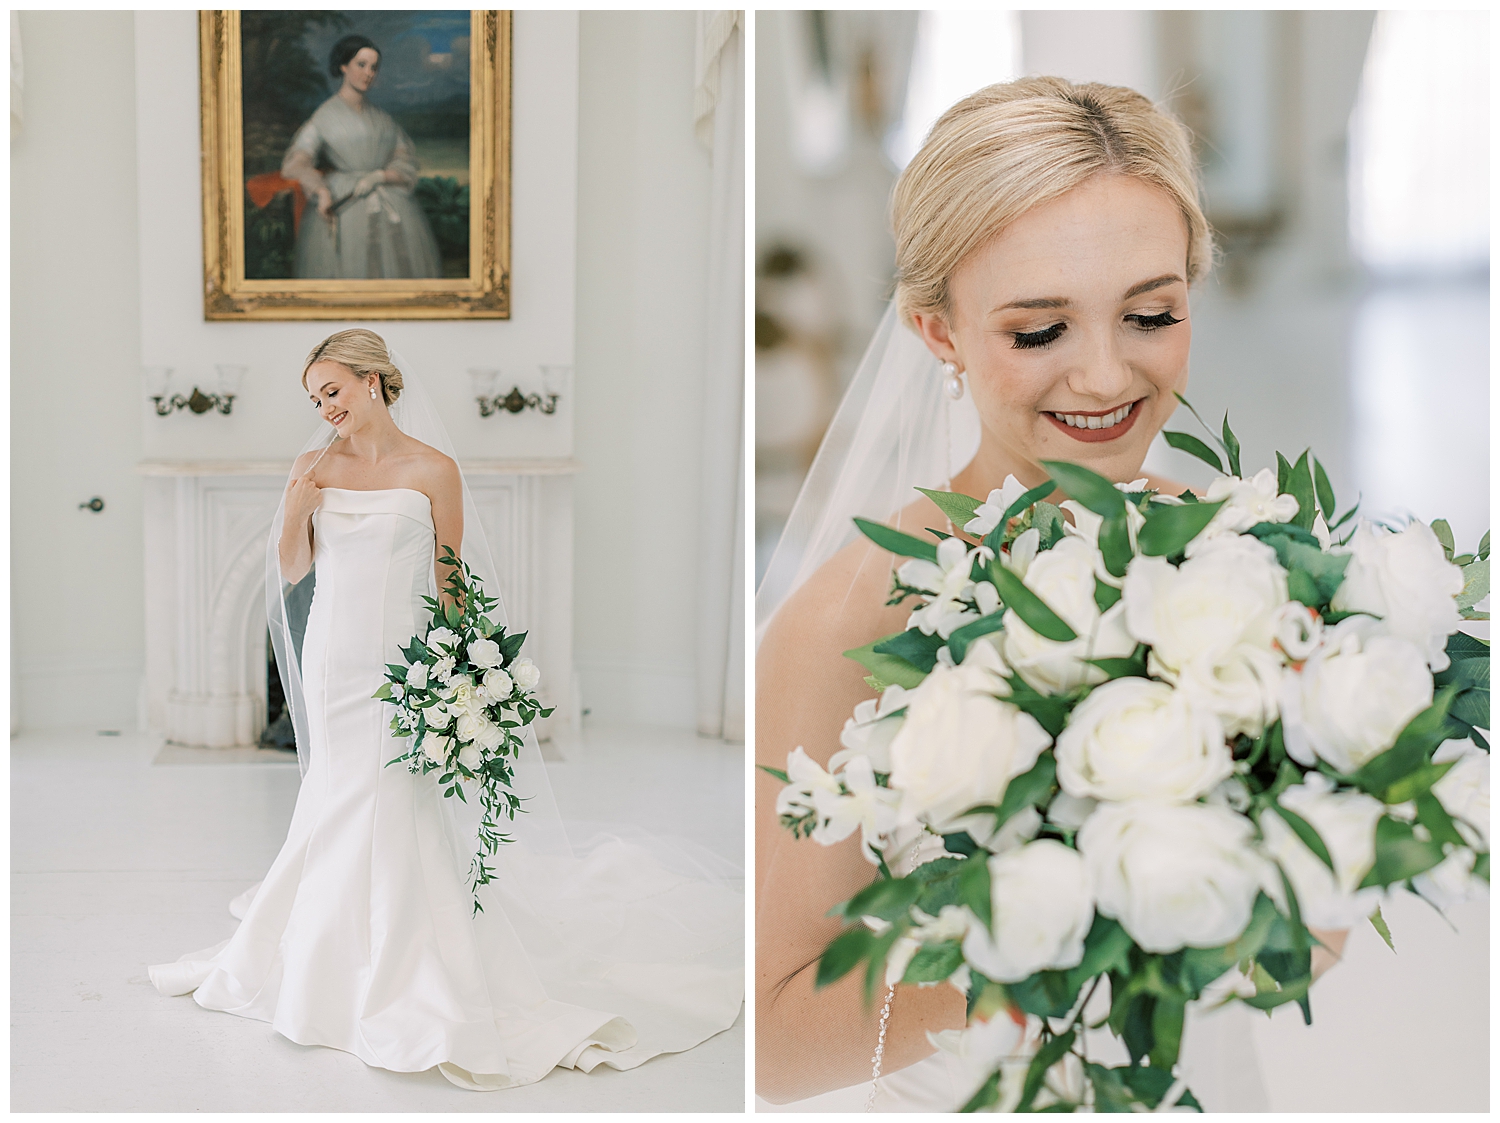 A bride looks down at her bouquet in a white room.